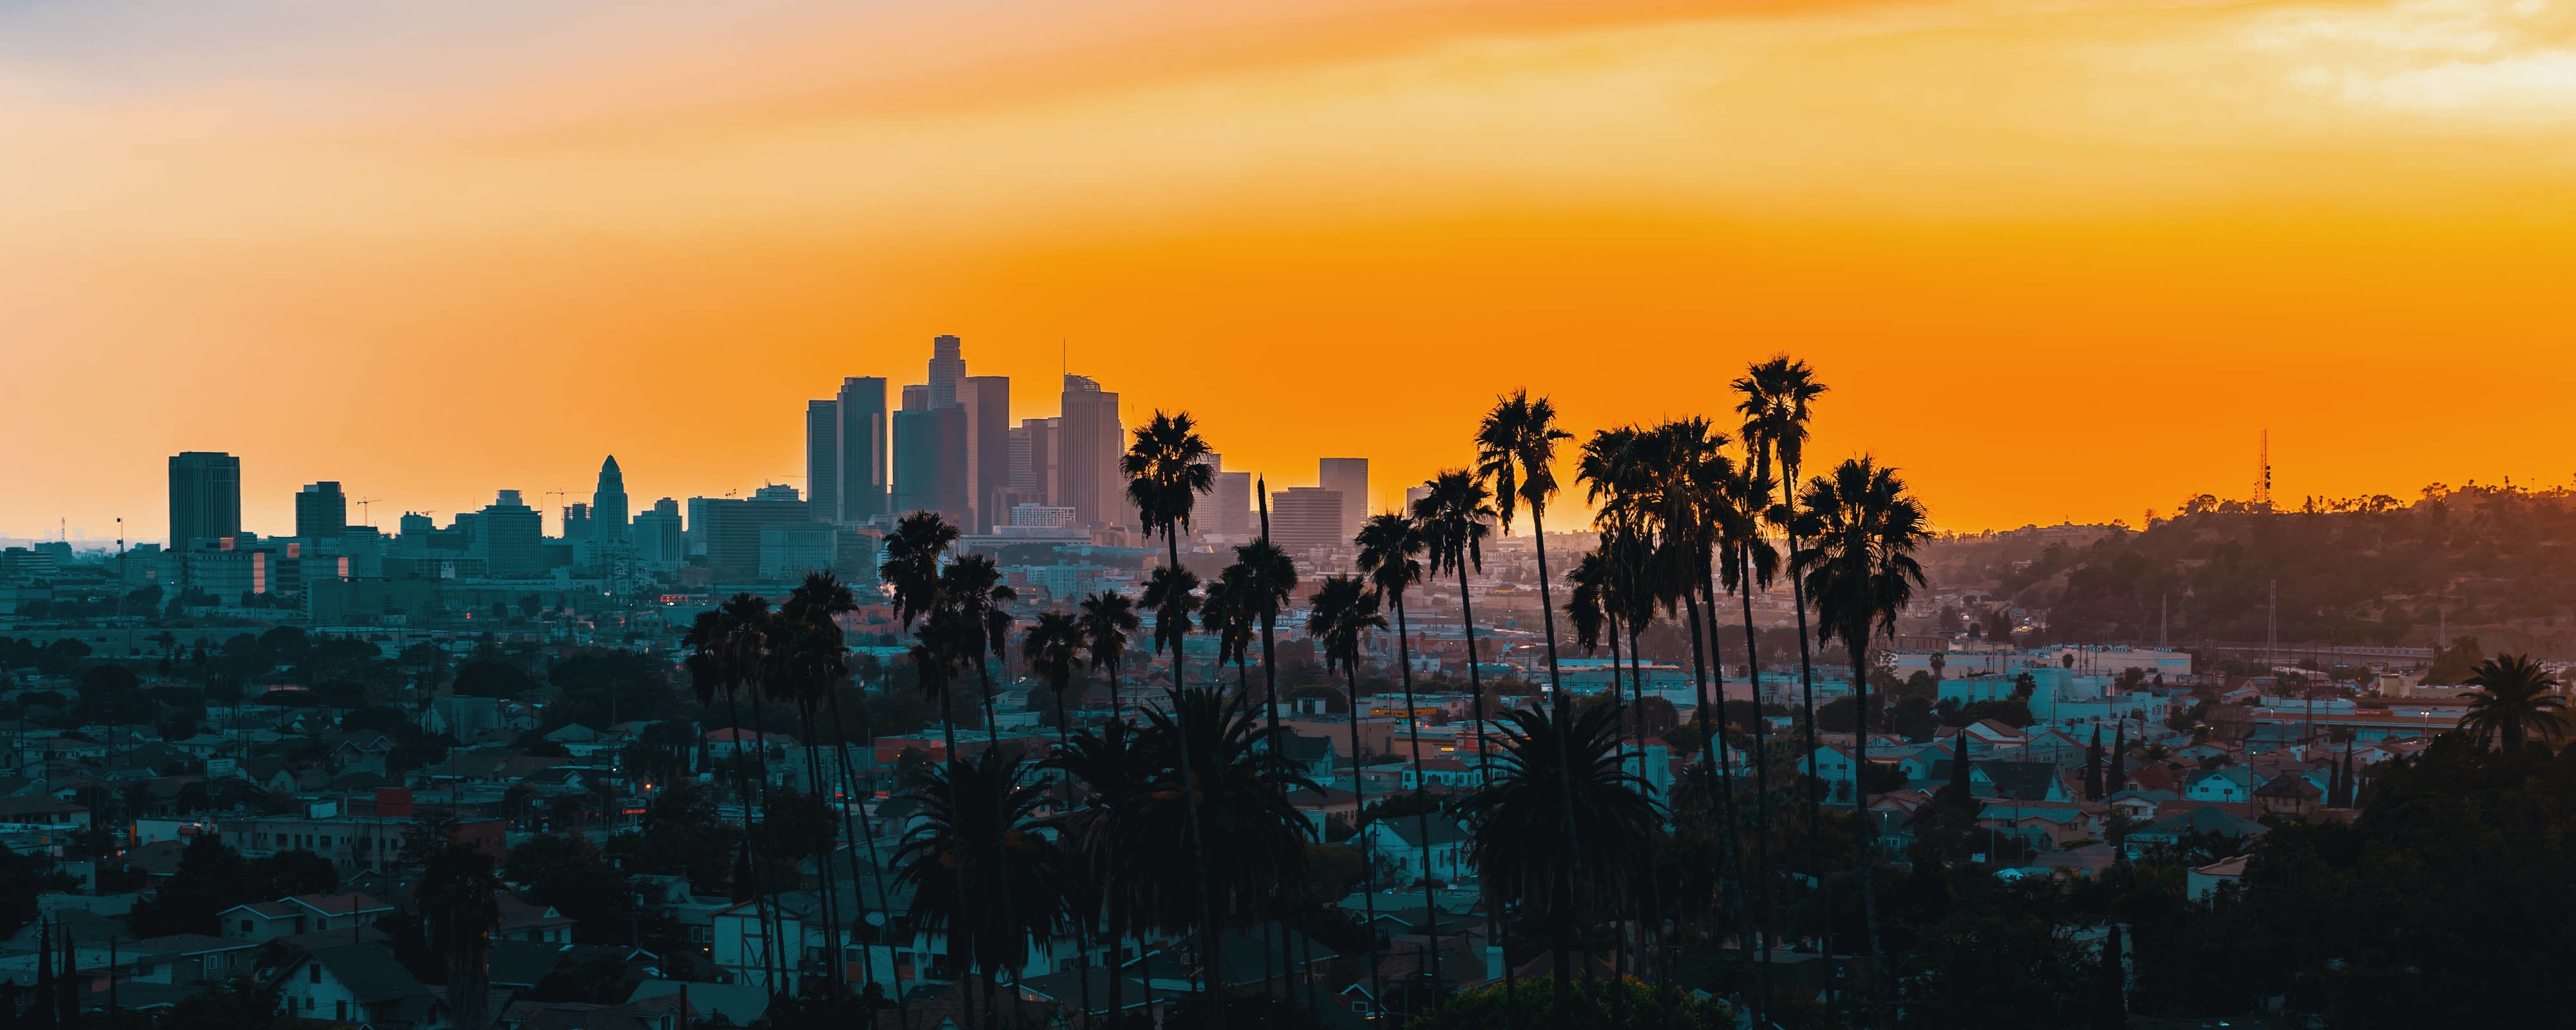 Los Angeles at sunset.